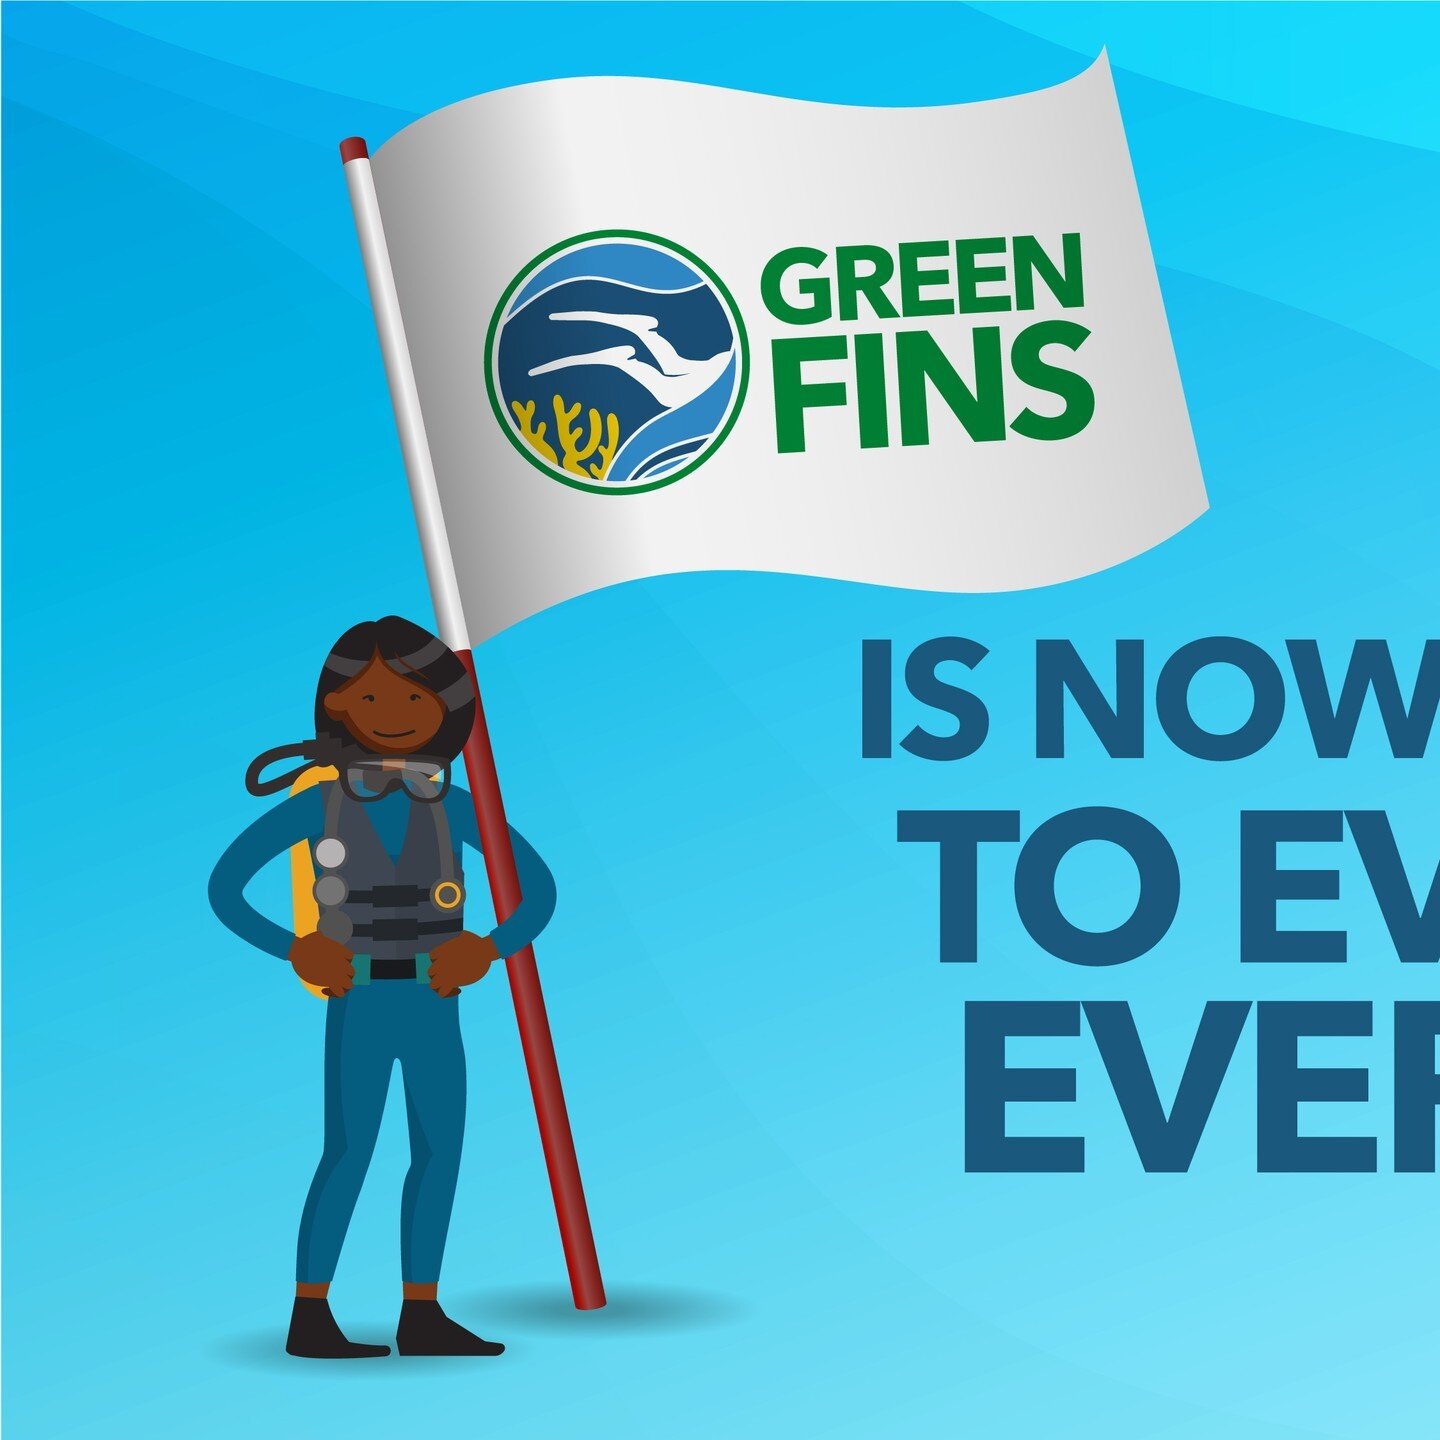 #GreenFins is now available to everyone, everywhere! 🌏🪸

With the launch of the Green Fins Hub, @Reef-World is making 18 years of Green Fins experience, tools and knowledge available digitally so that they are easily accessible to empower diving in